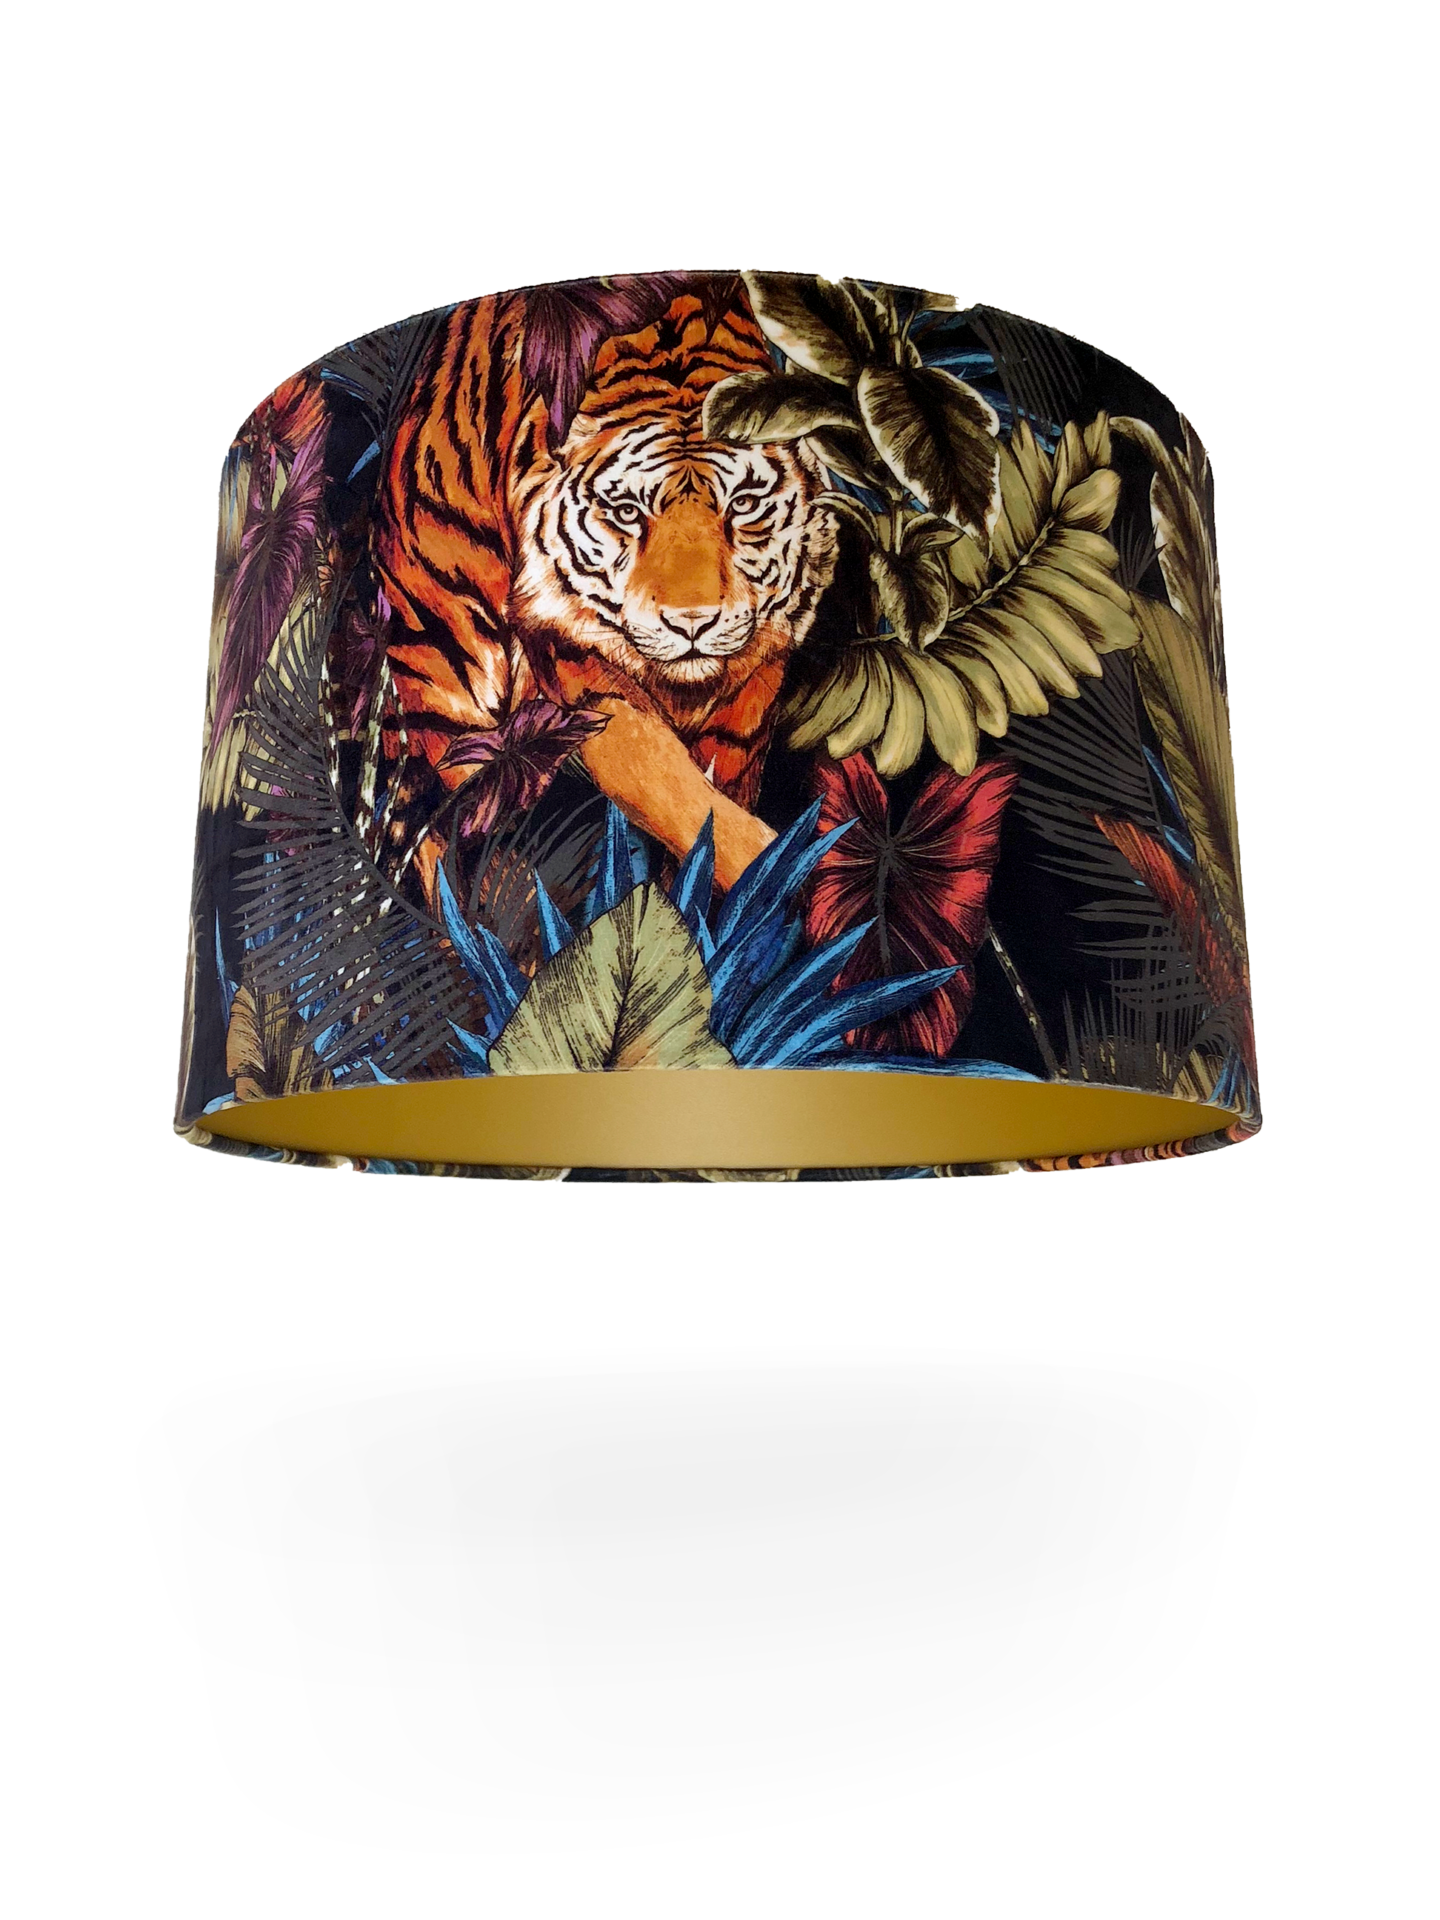 Loti's Lampshades tiger with gold inner lampshade